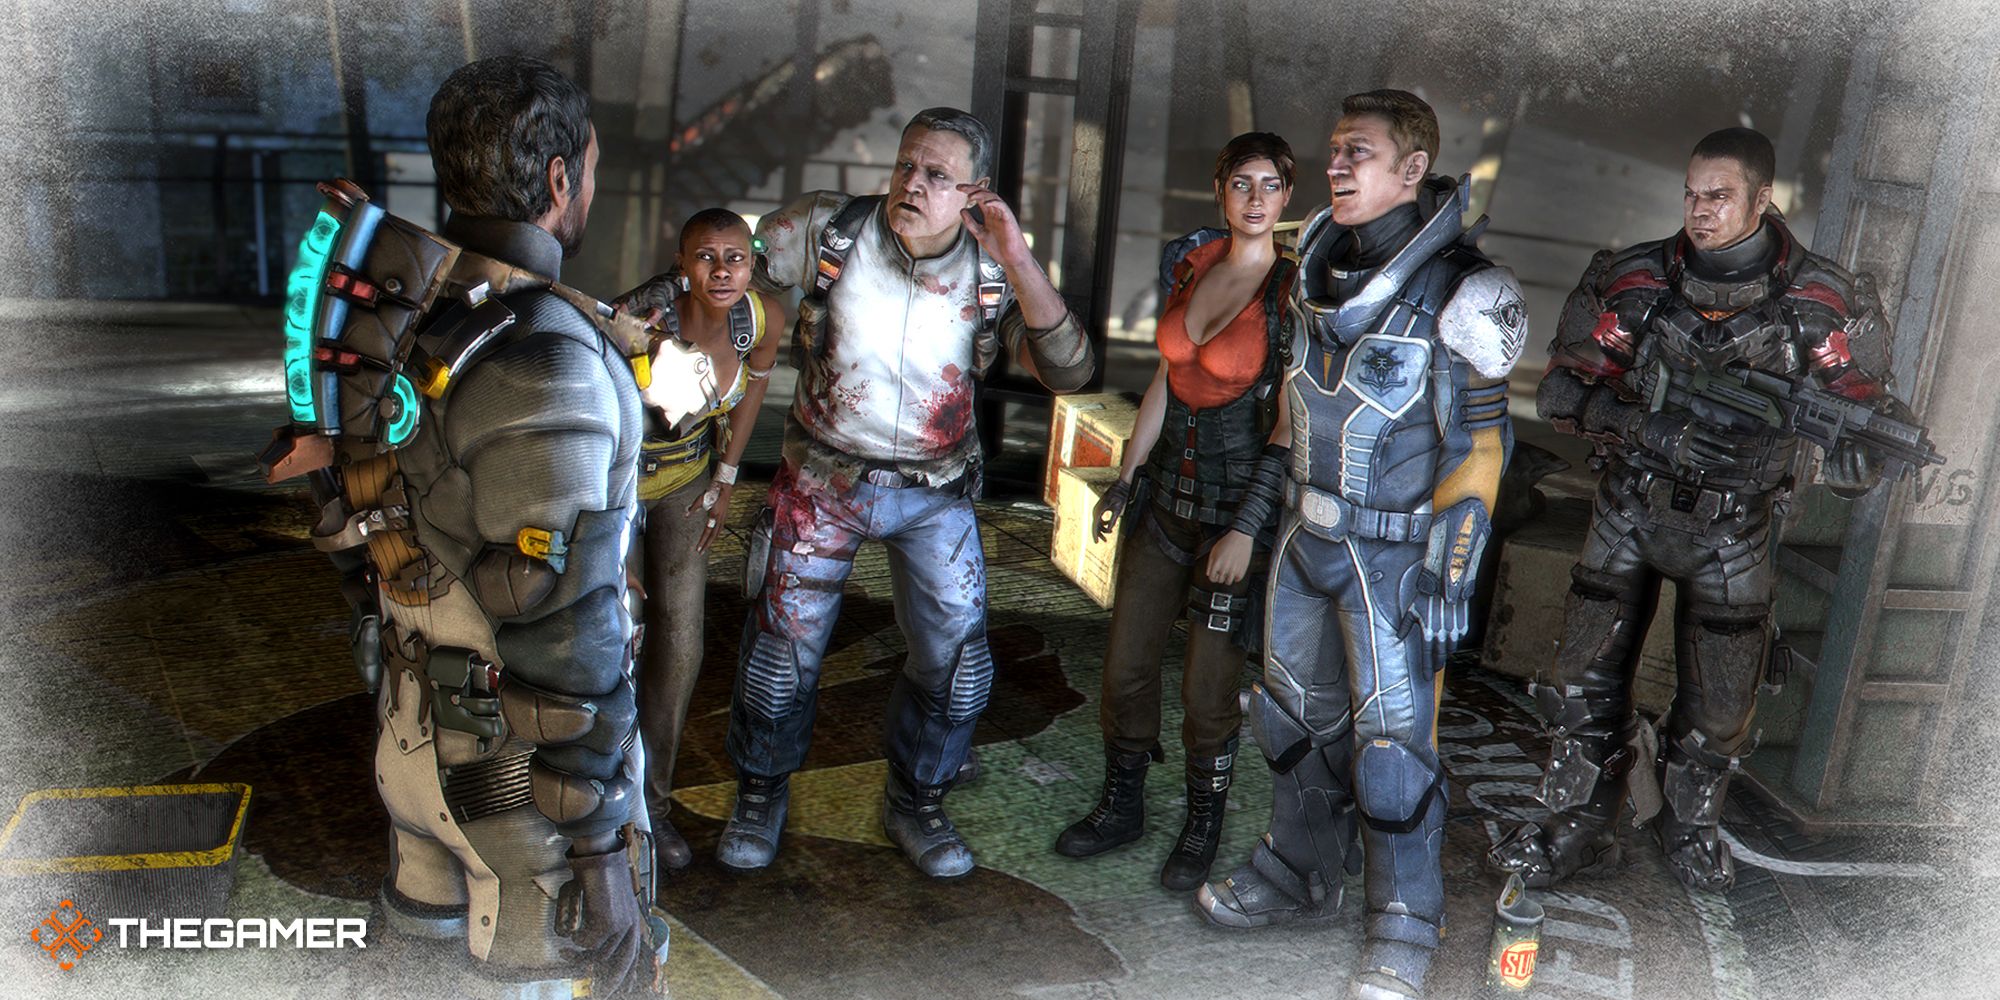 The 'Dead Space' Franchise Ranked, Including Main Games, Spinoffs